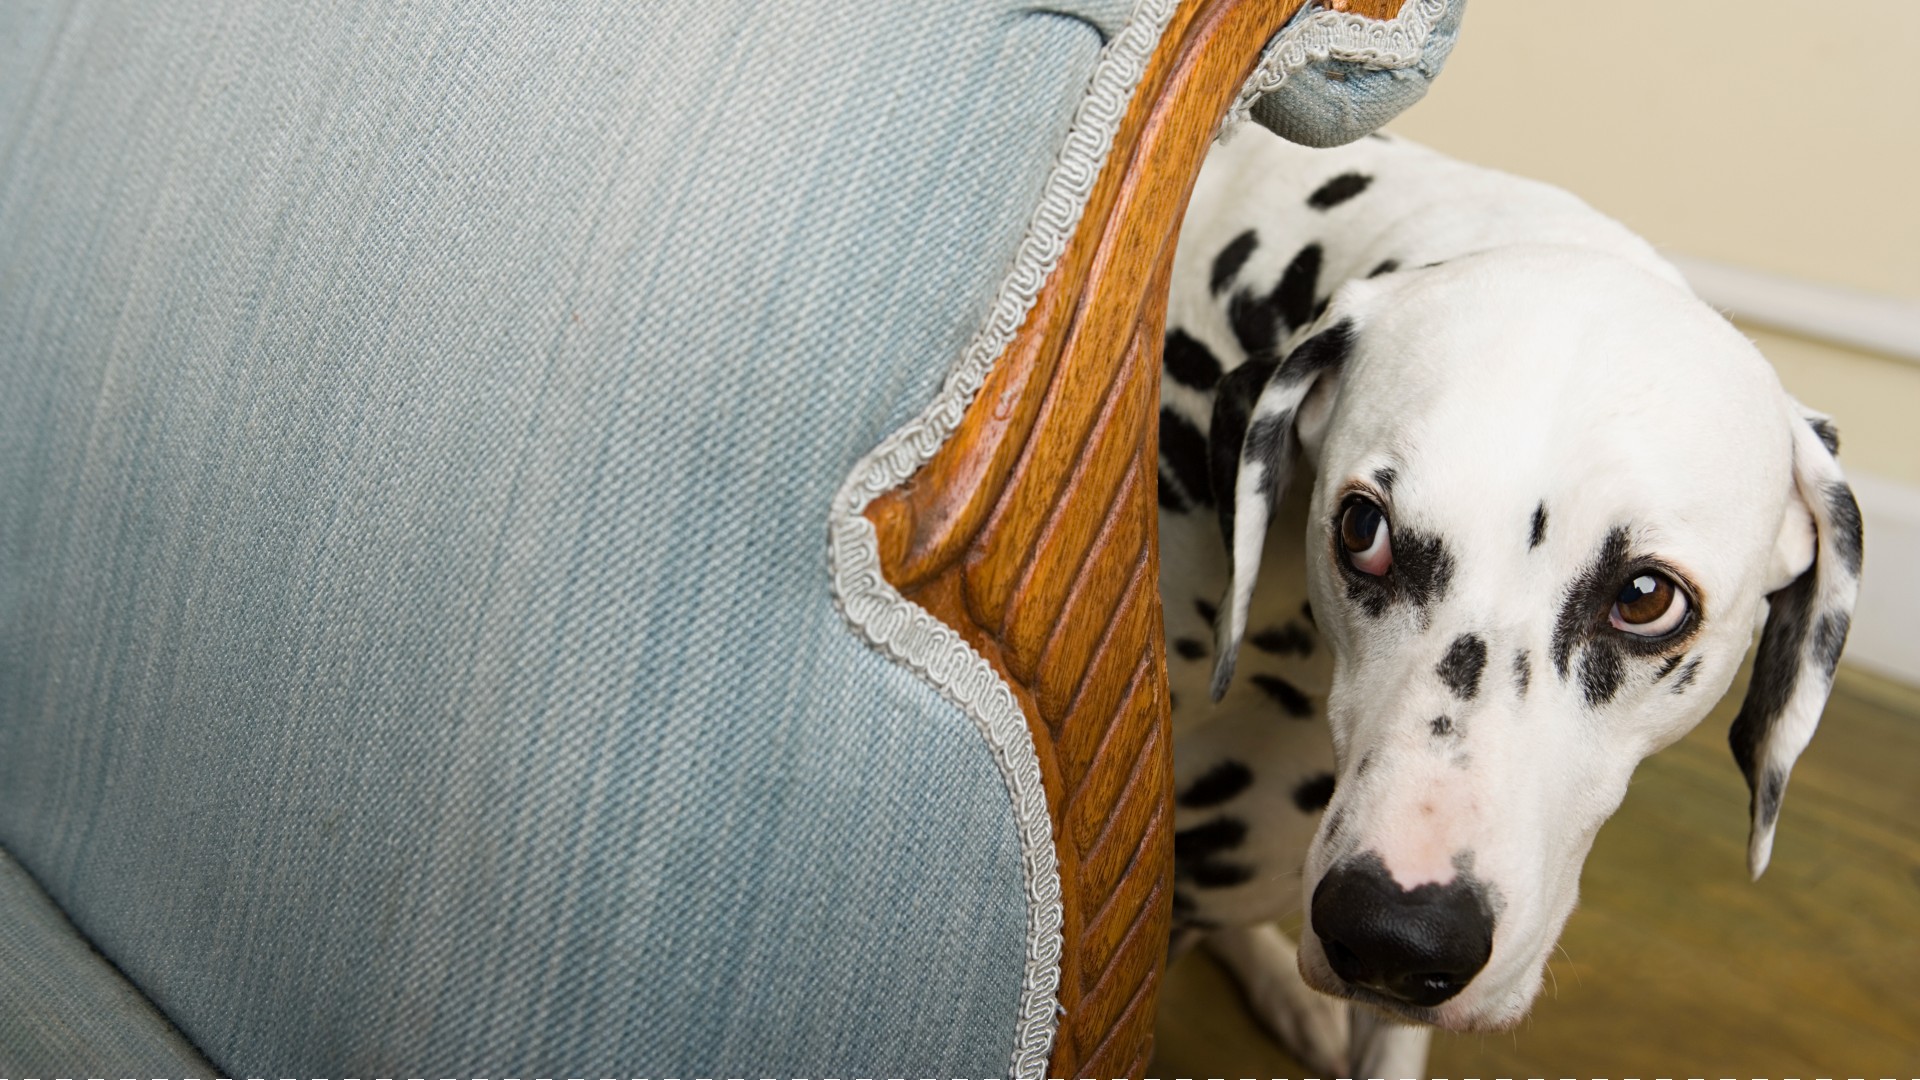 Dalmatian dog hiding behind couch